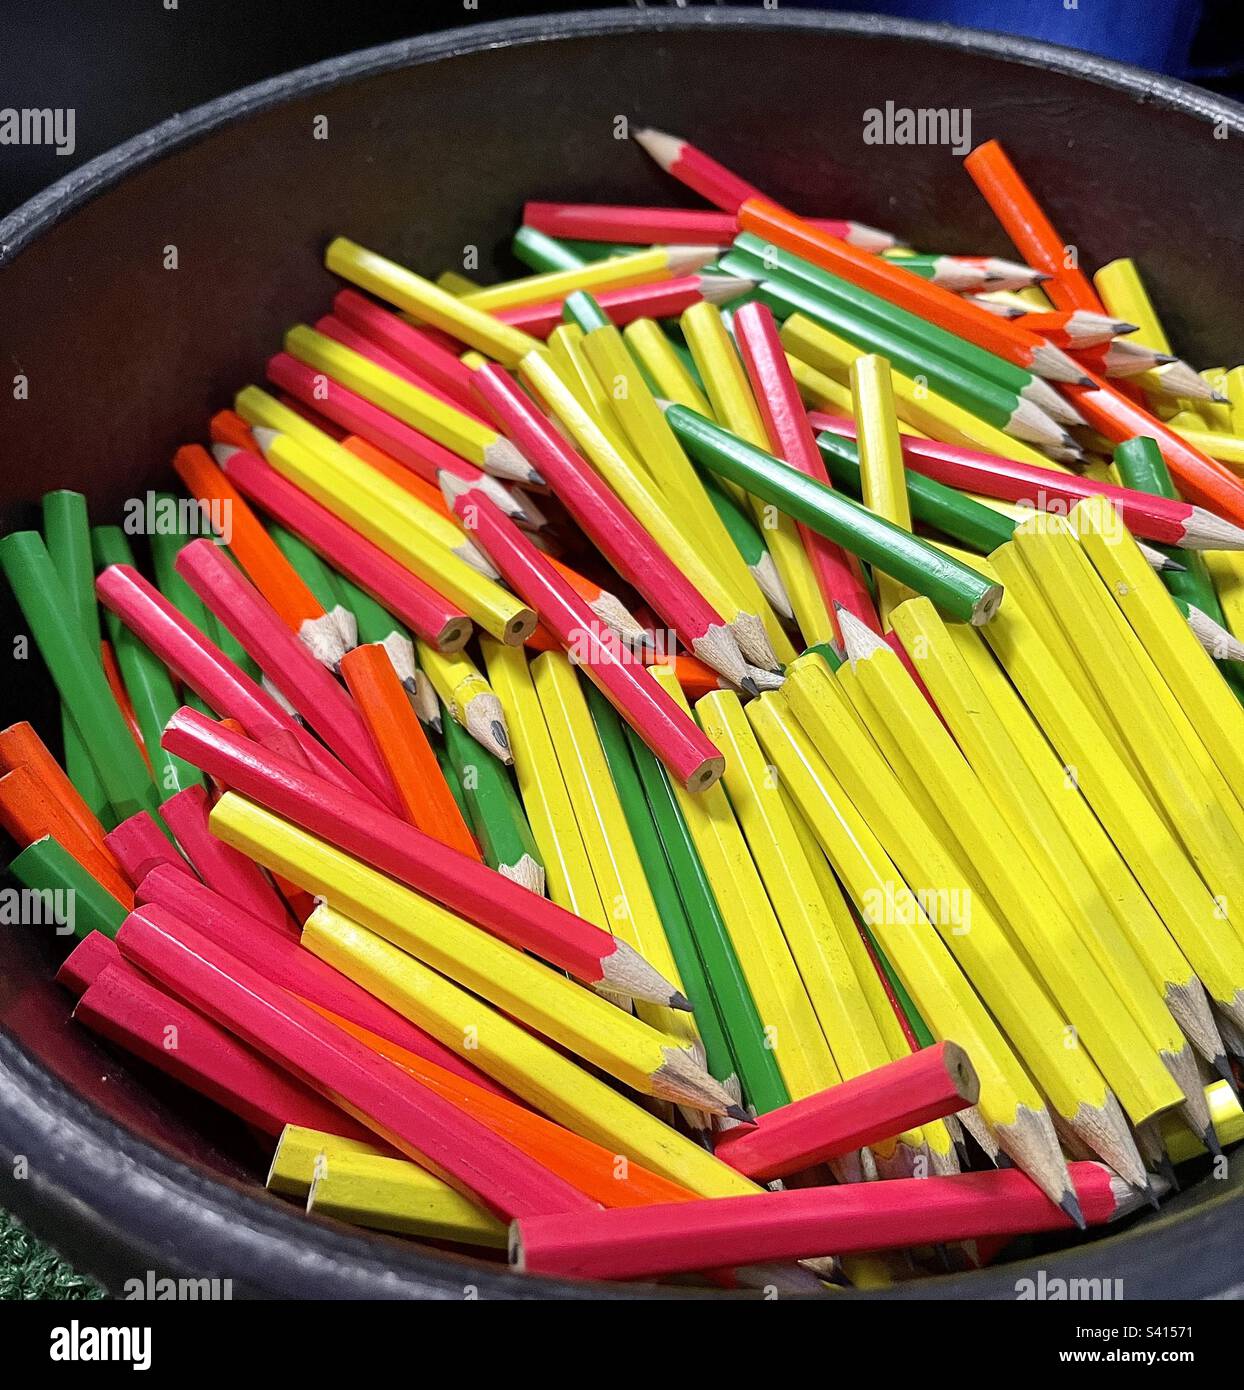 A collection of colorful pencils Stock Photo